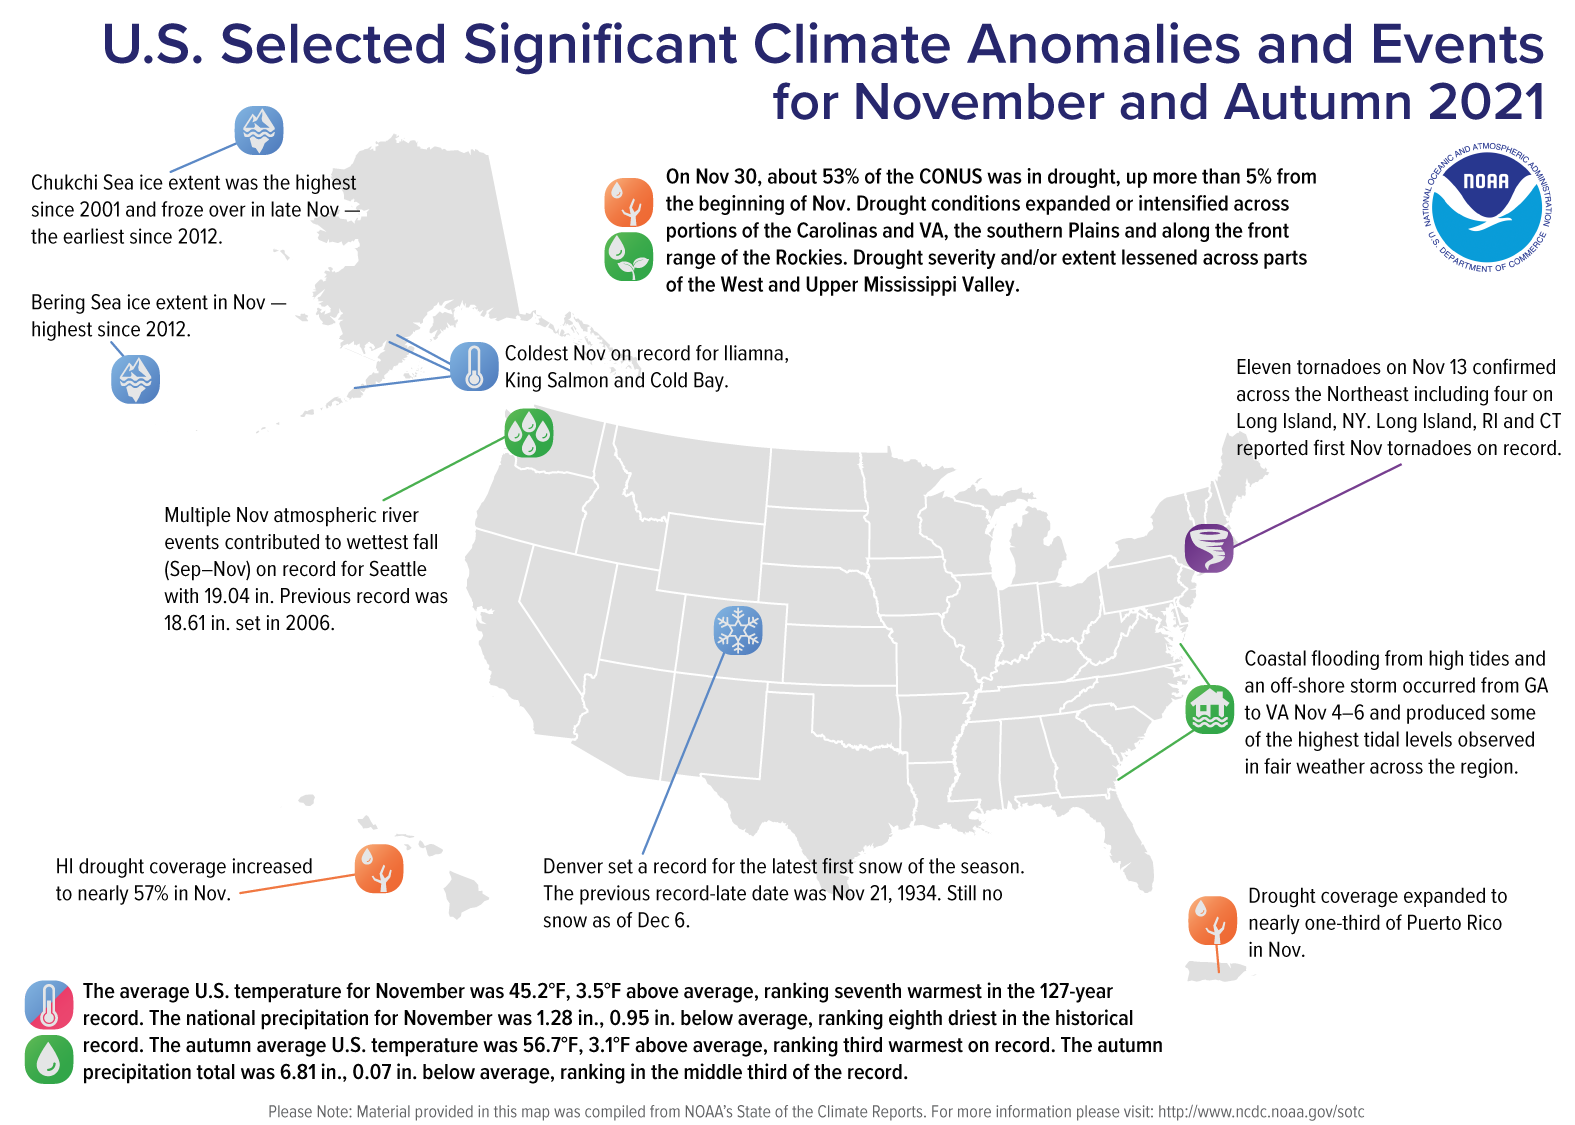 A map of the United States plotted with significant climate events that occurred during November 2021.